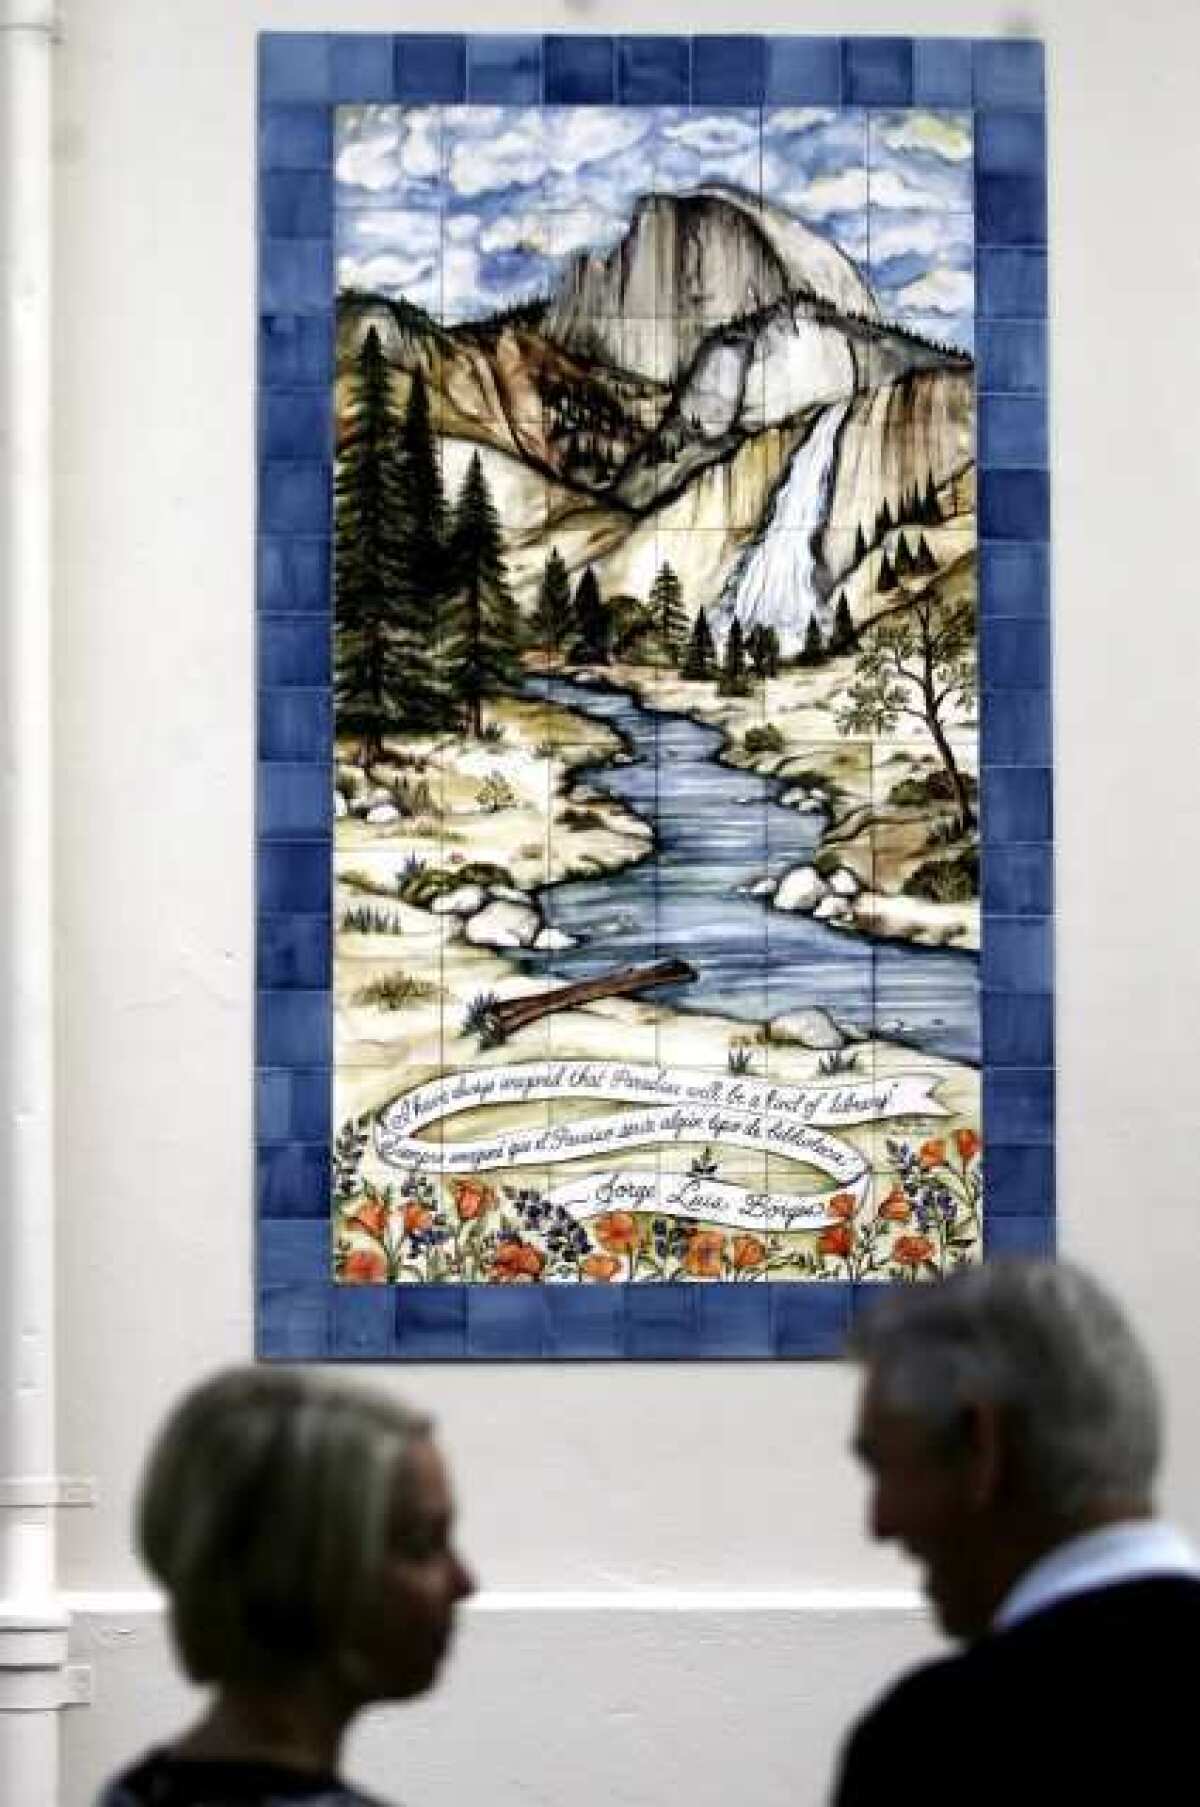 The John Muir Elementary School Literacy Garden includes a tile mural depicting Yosemite Valley and a quote by Argentine writer Jorge Luis Borges at the Glendale school. The area used to be a small unused space outside the library.